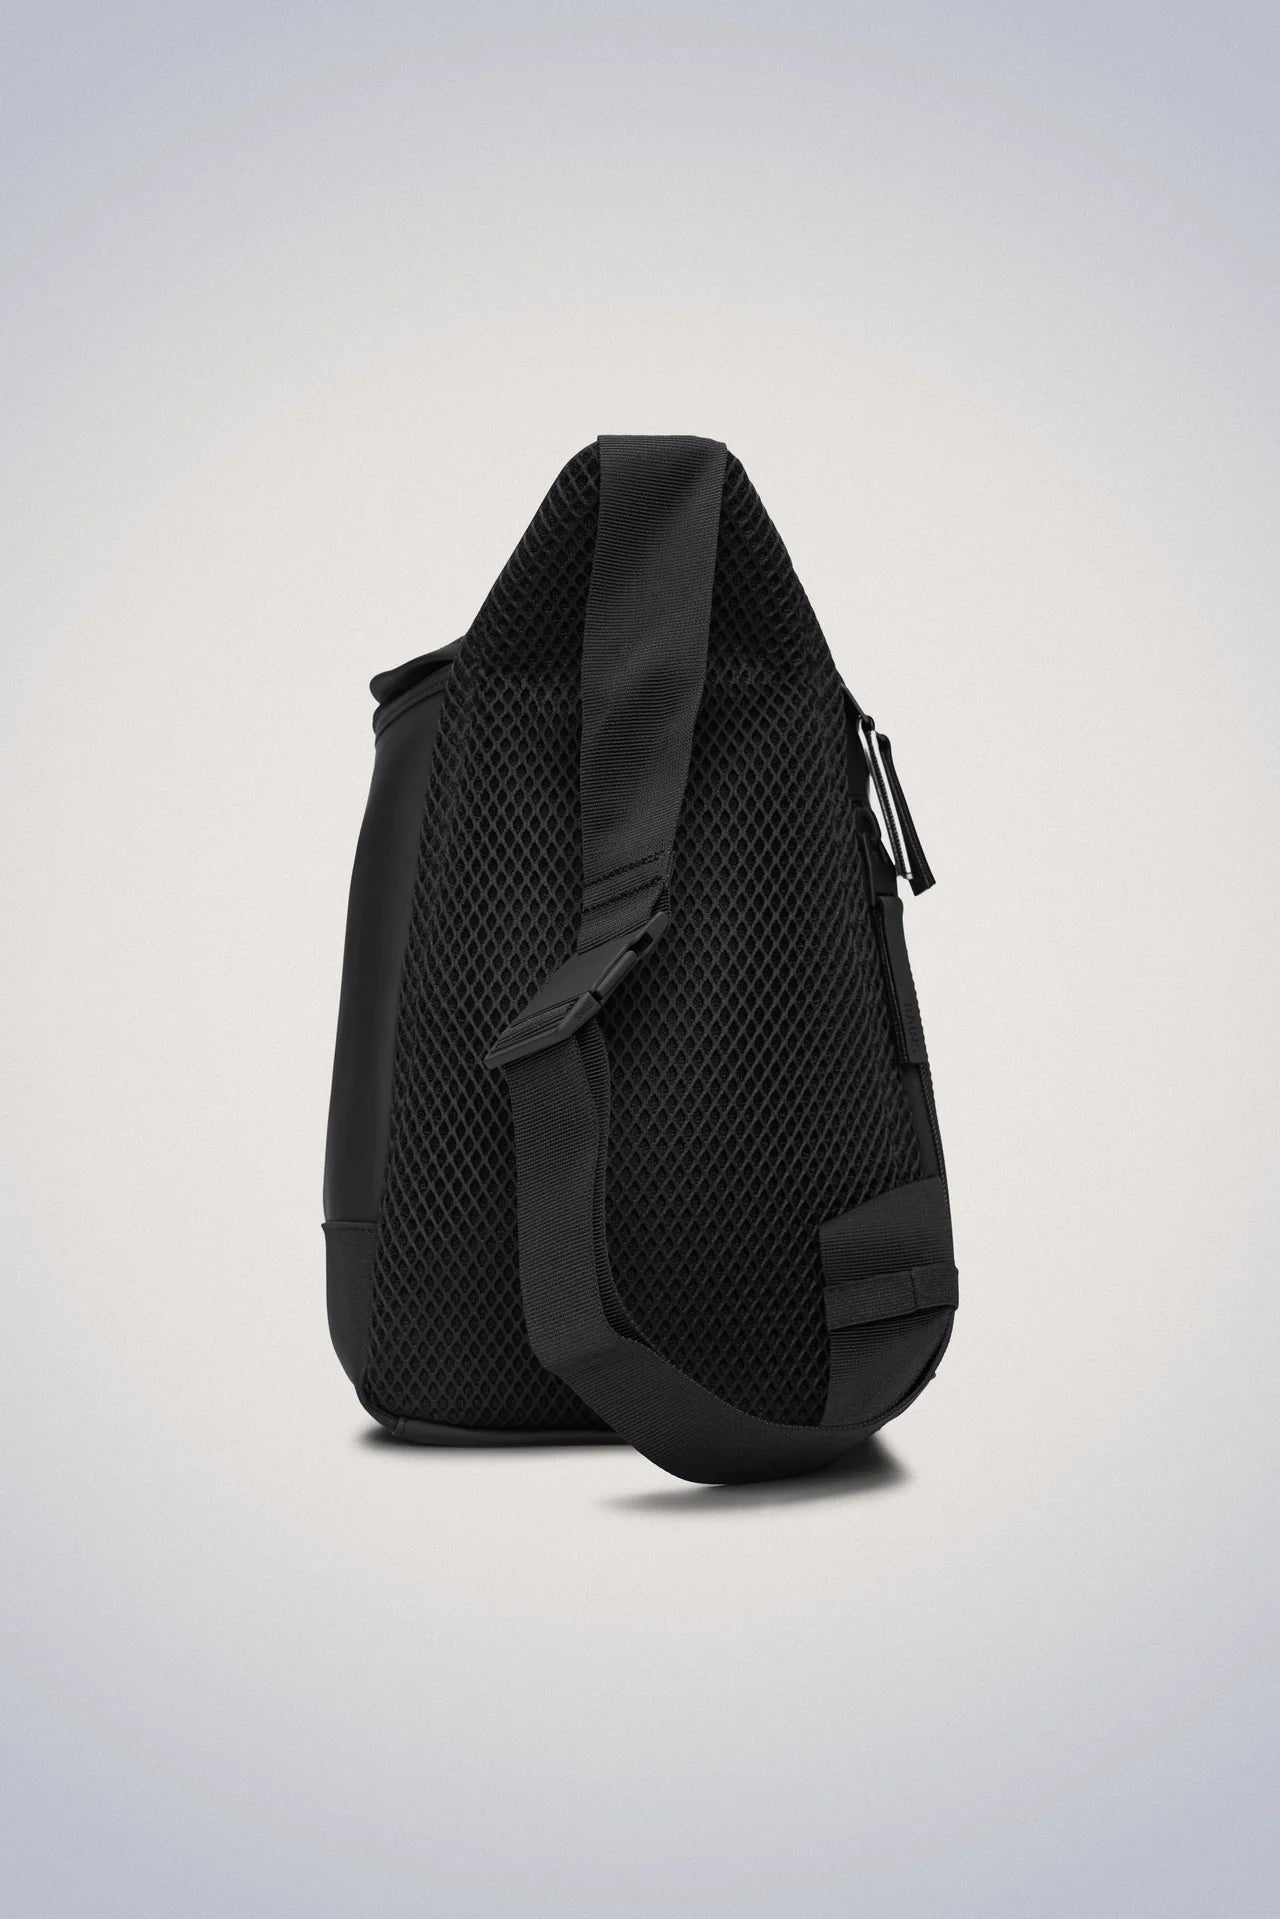 A compact Rains Trail Sling Bag - Black on a white background.